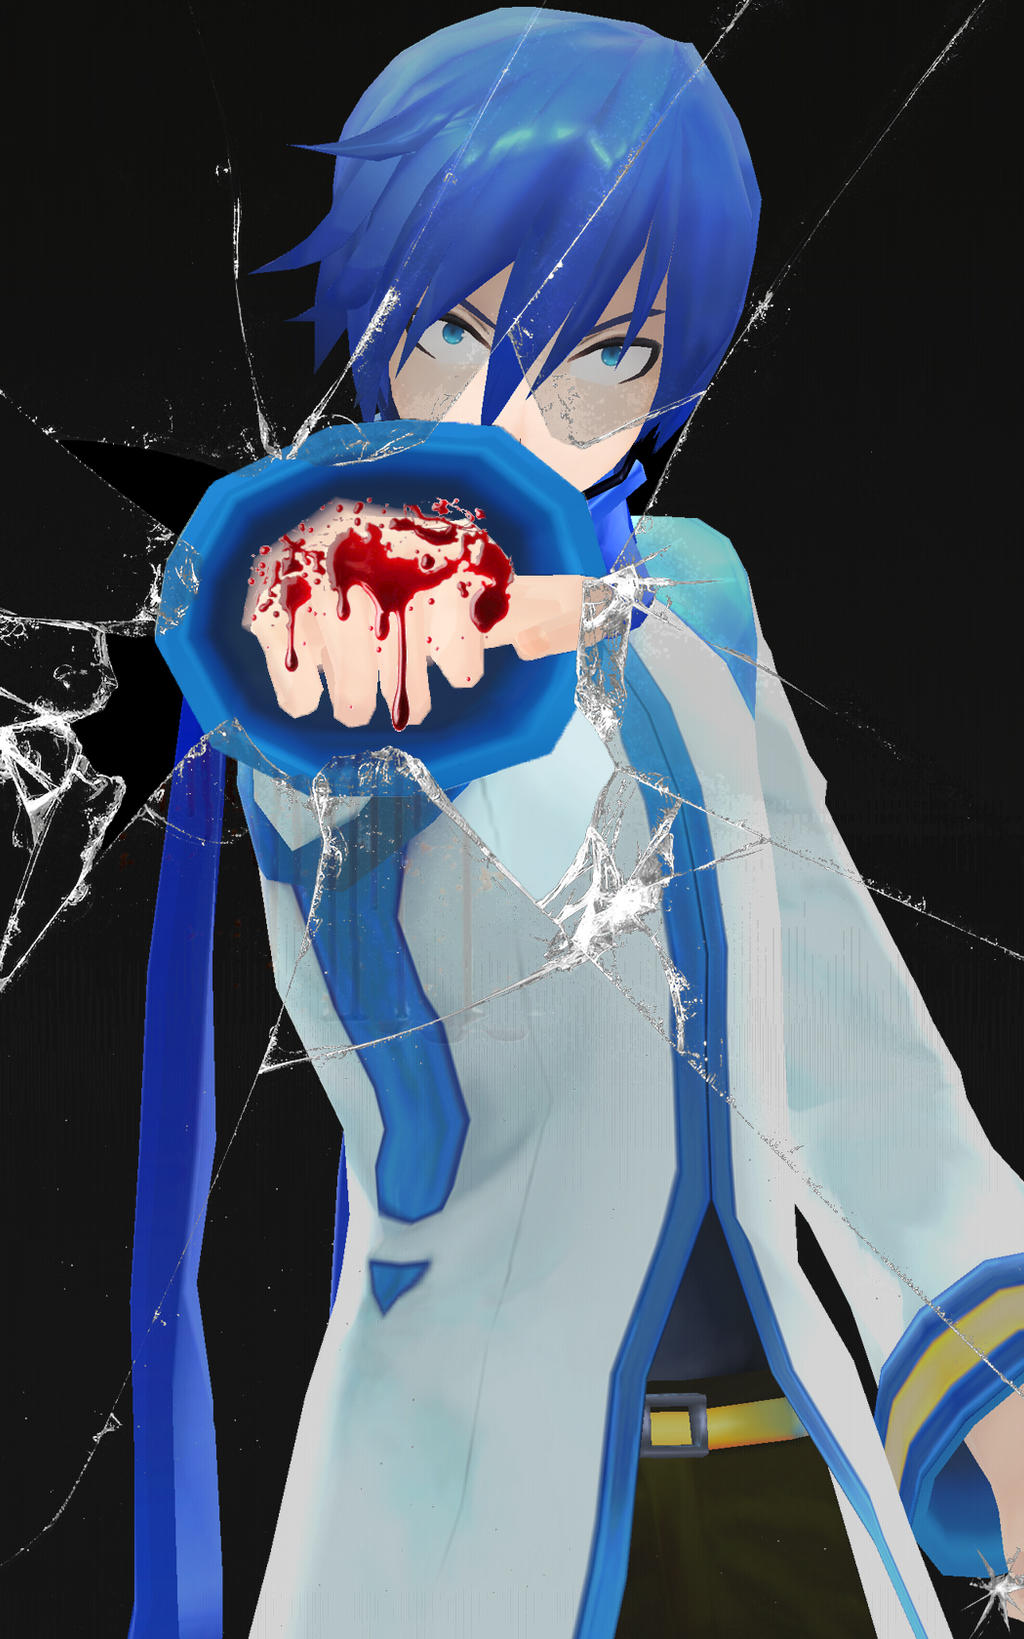 Mmd Vocaloid Kaito Glass Punch Android Wallpaper By Topex Psy On Deviantart